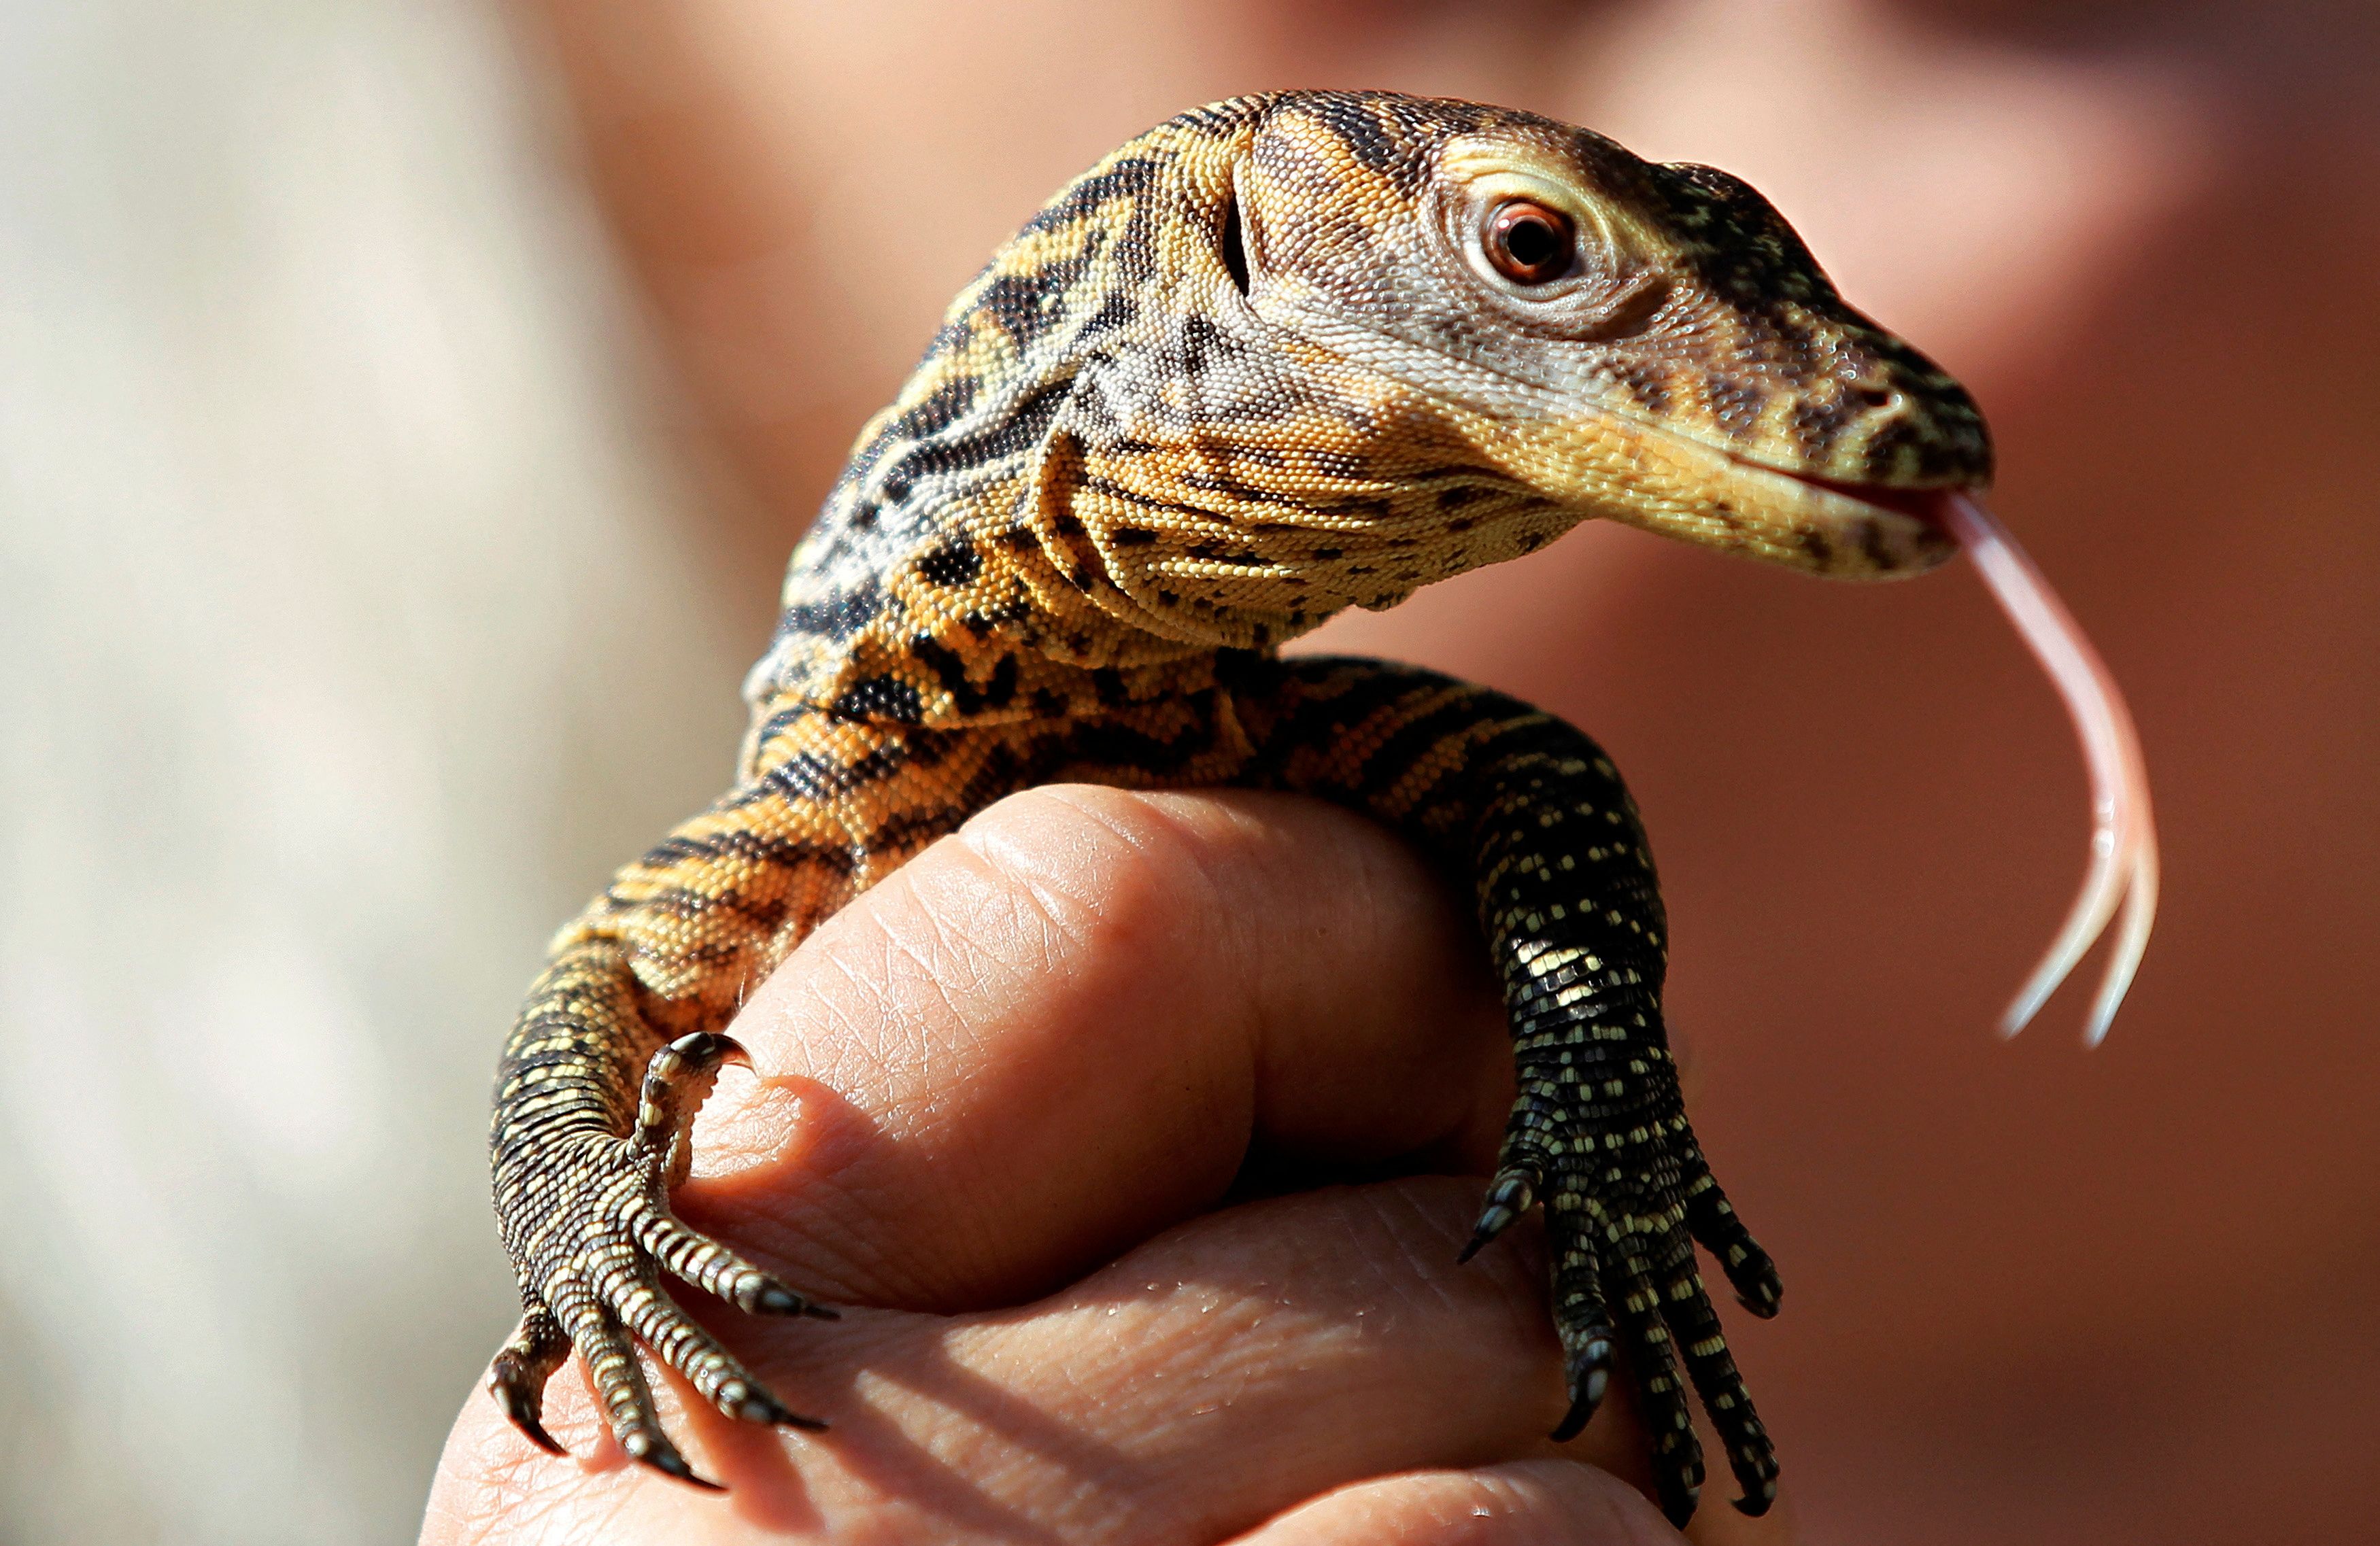 A reptile curator holds a 10-day-old baby Komodo dragon at Prague Zoo